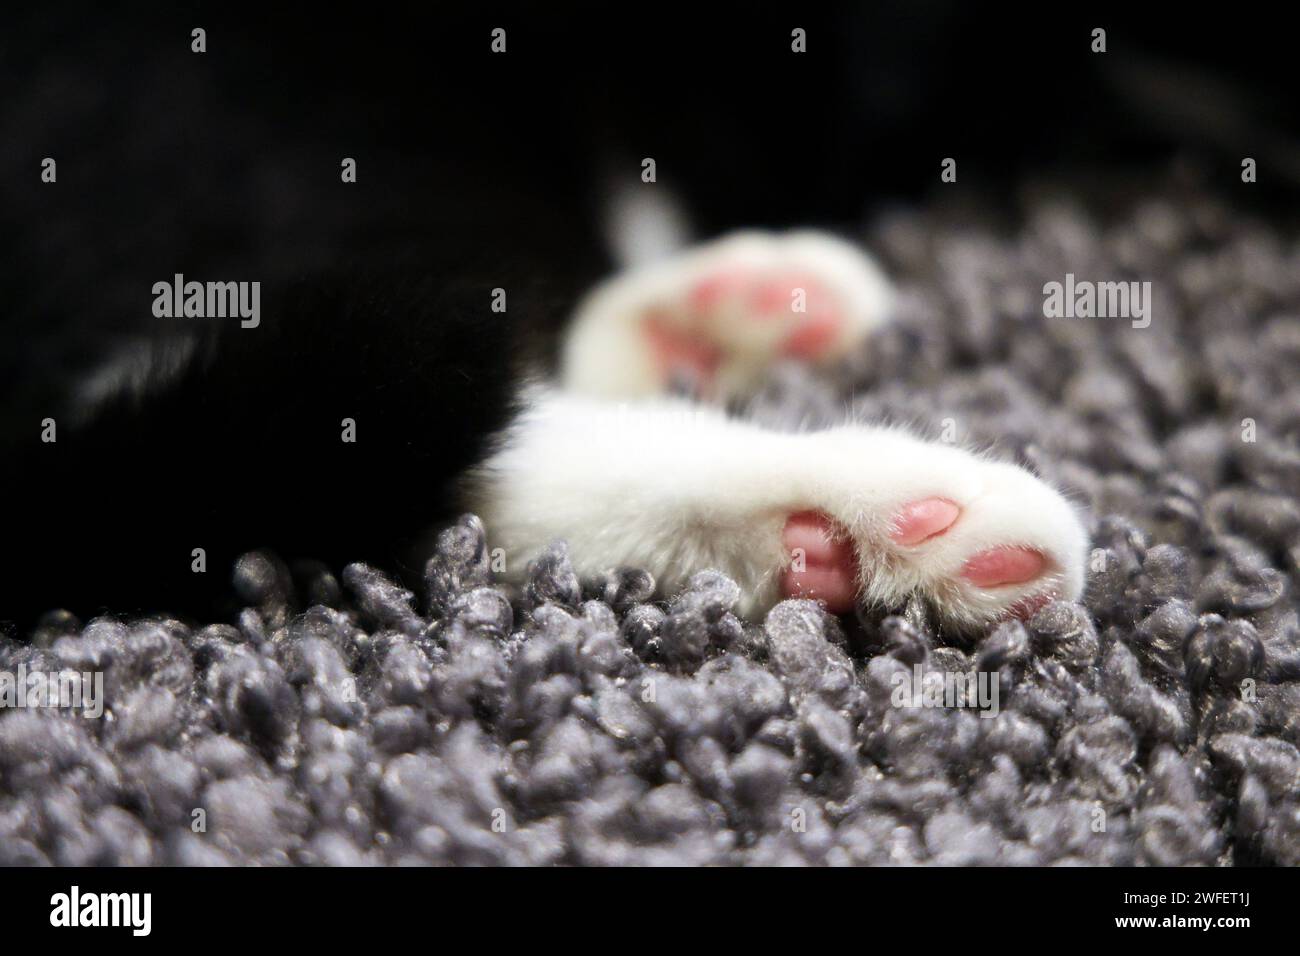 Toe beans - white cat paw with pink paw pads Stock Photo